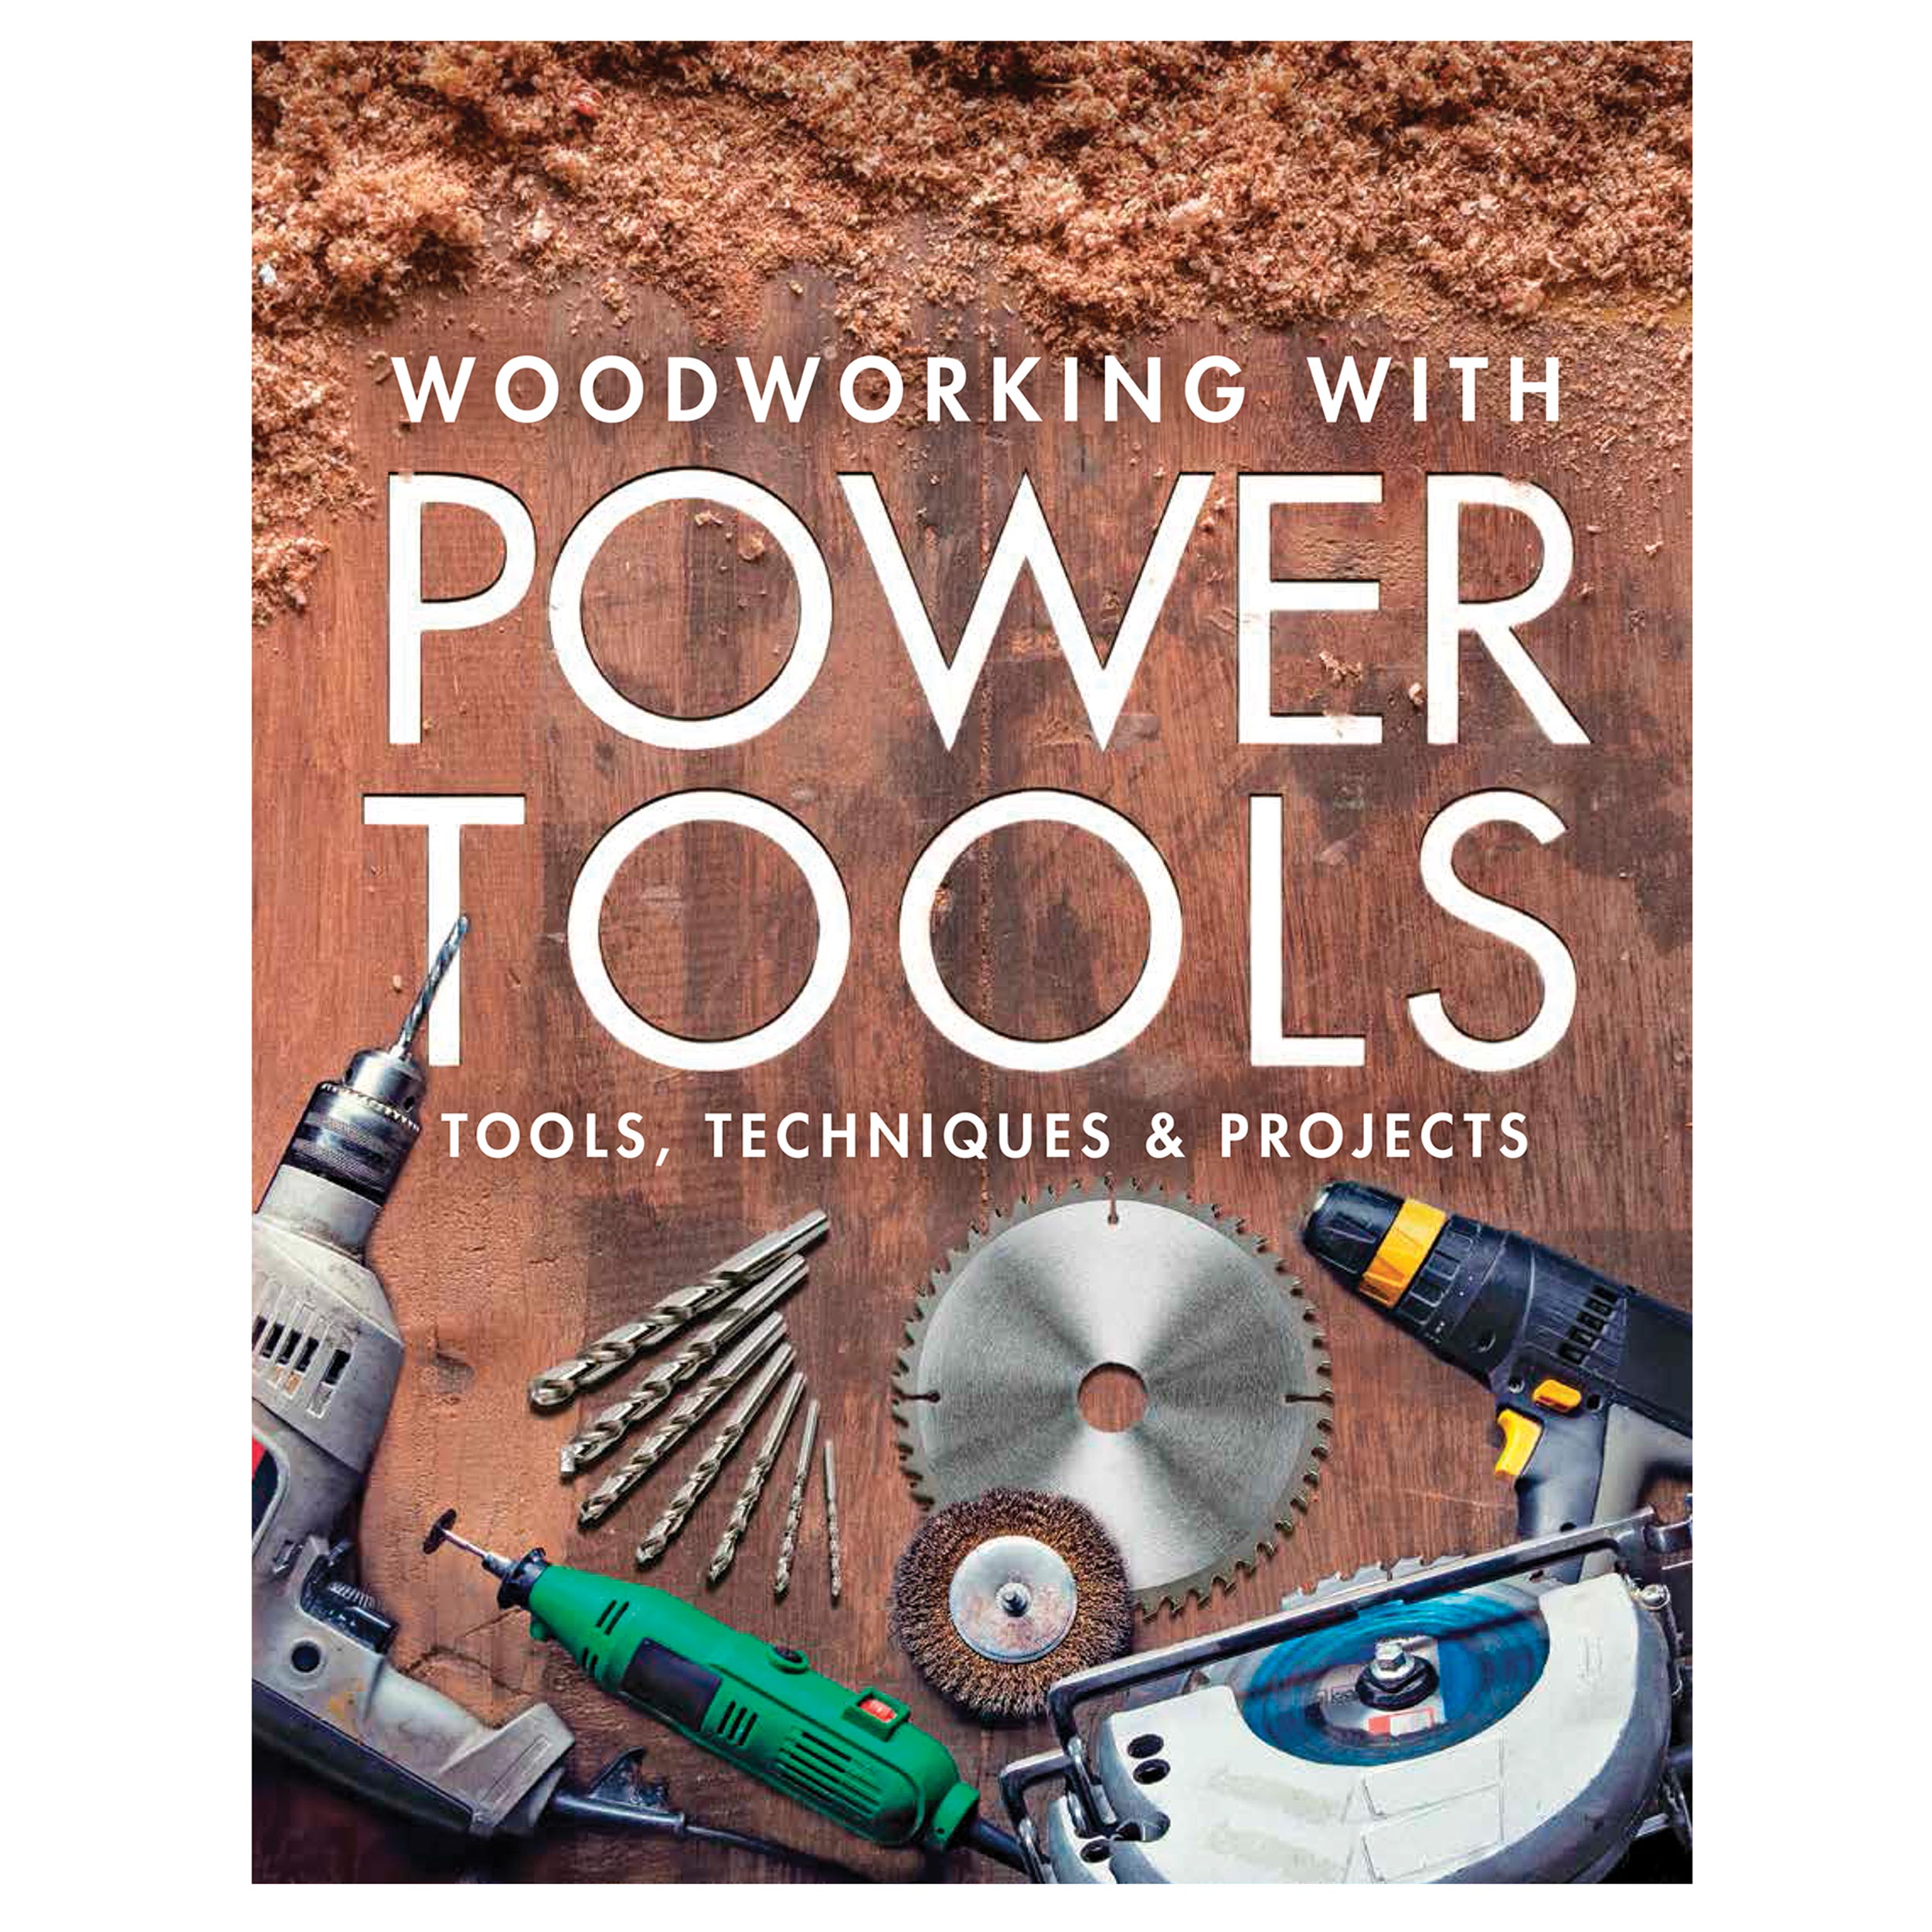 Woodworking With Power Tools